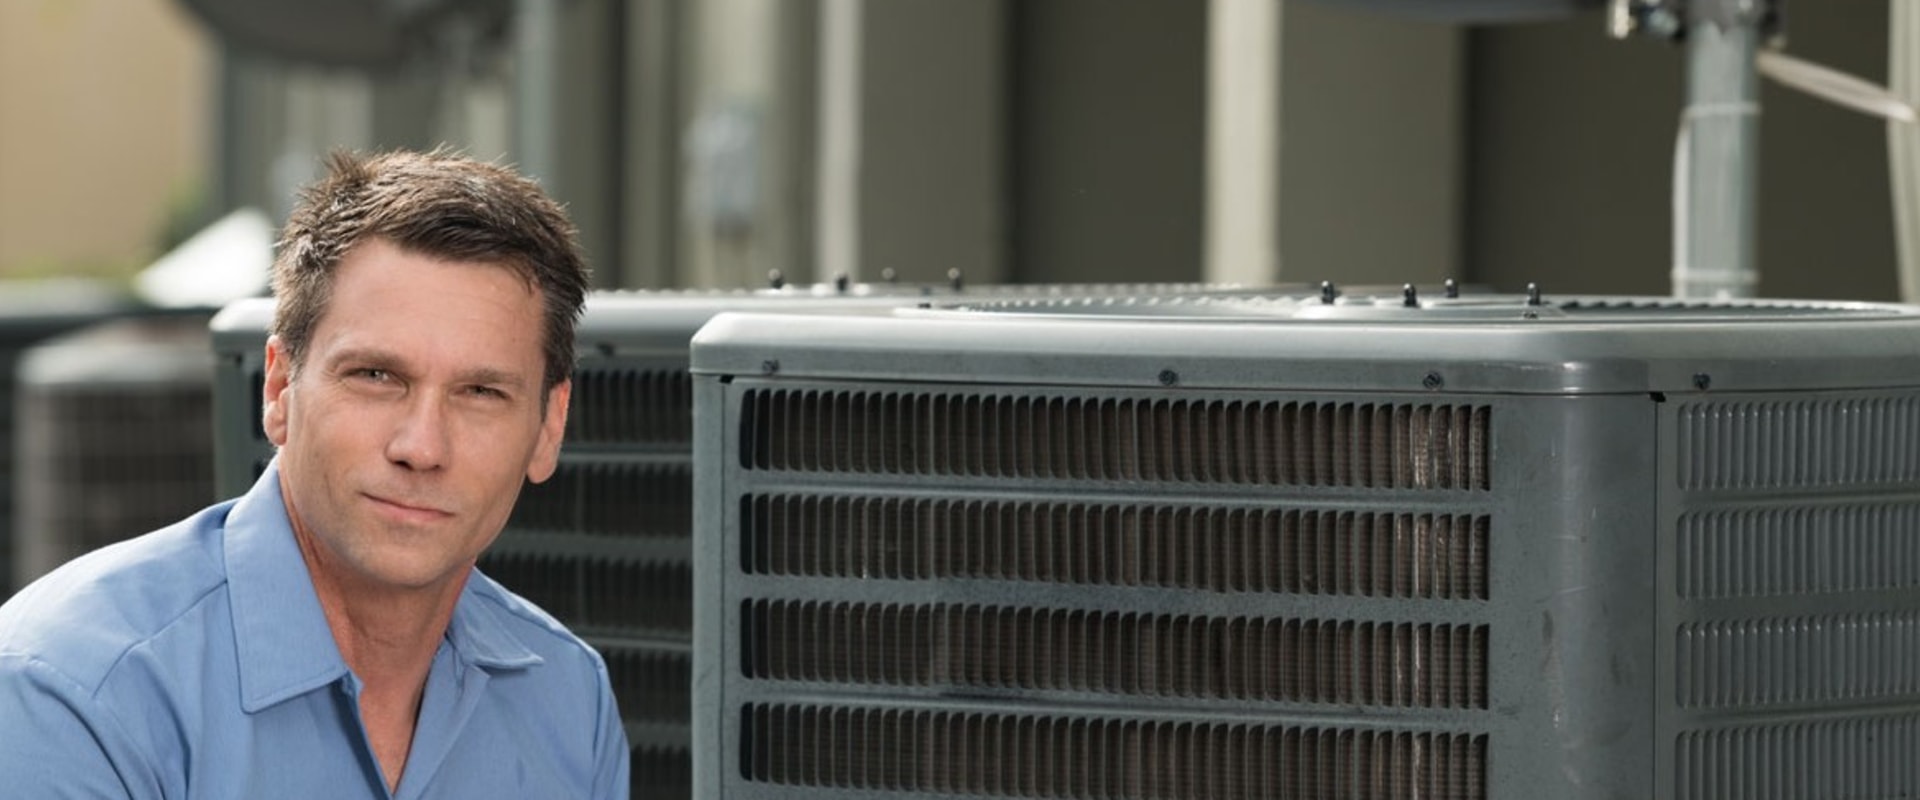 5 Reasons Why HVAC System Failures Can Spell Disaster for Your Business